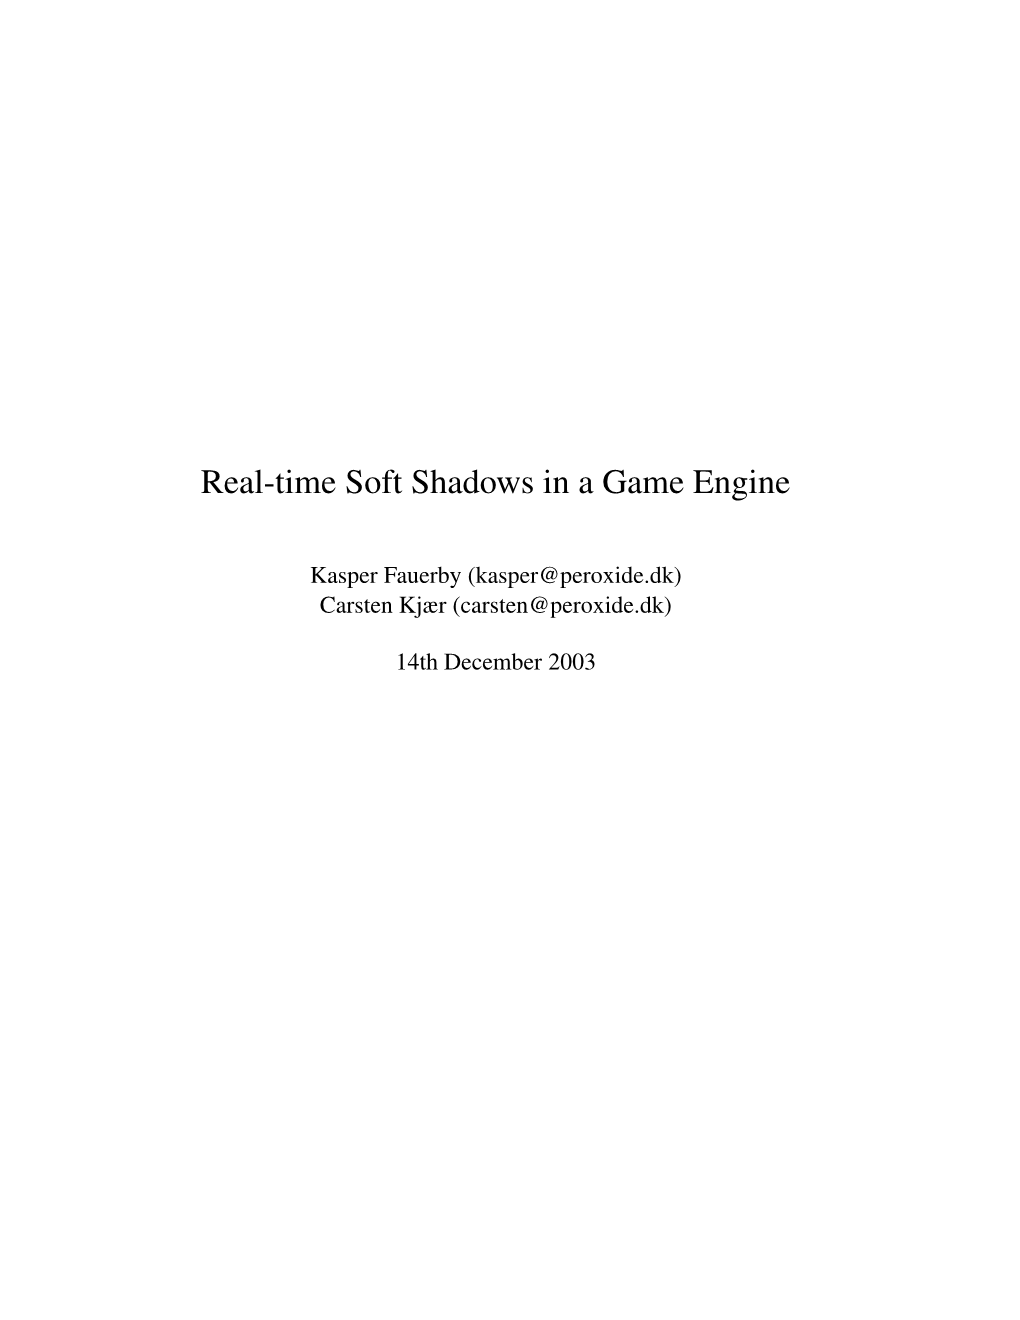 Real-Time Soft Shadows in a Game Engine